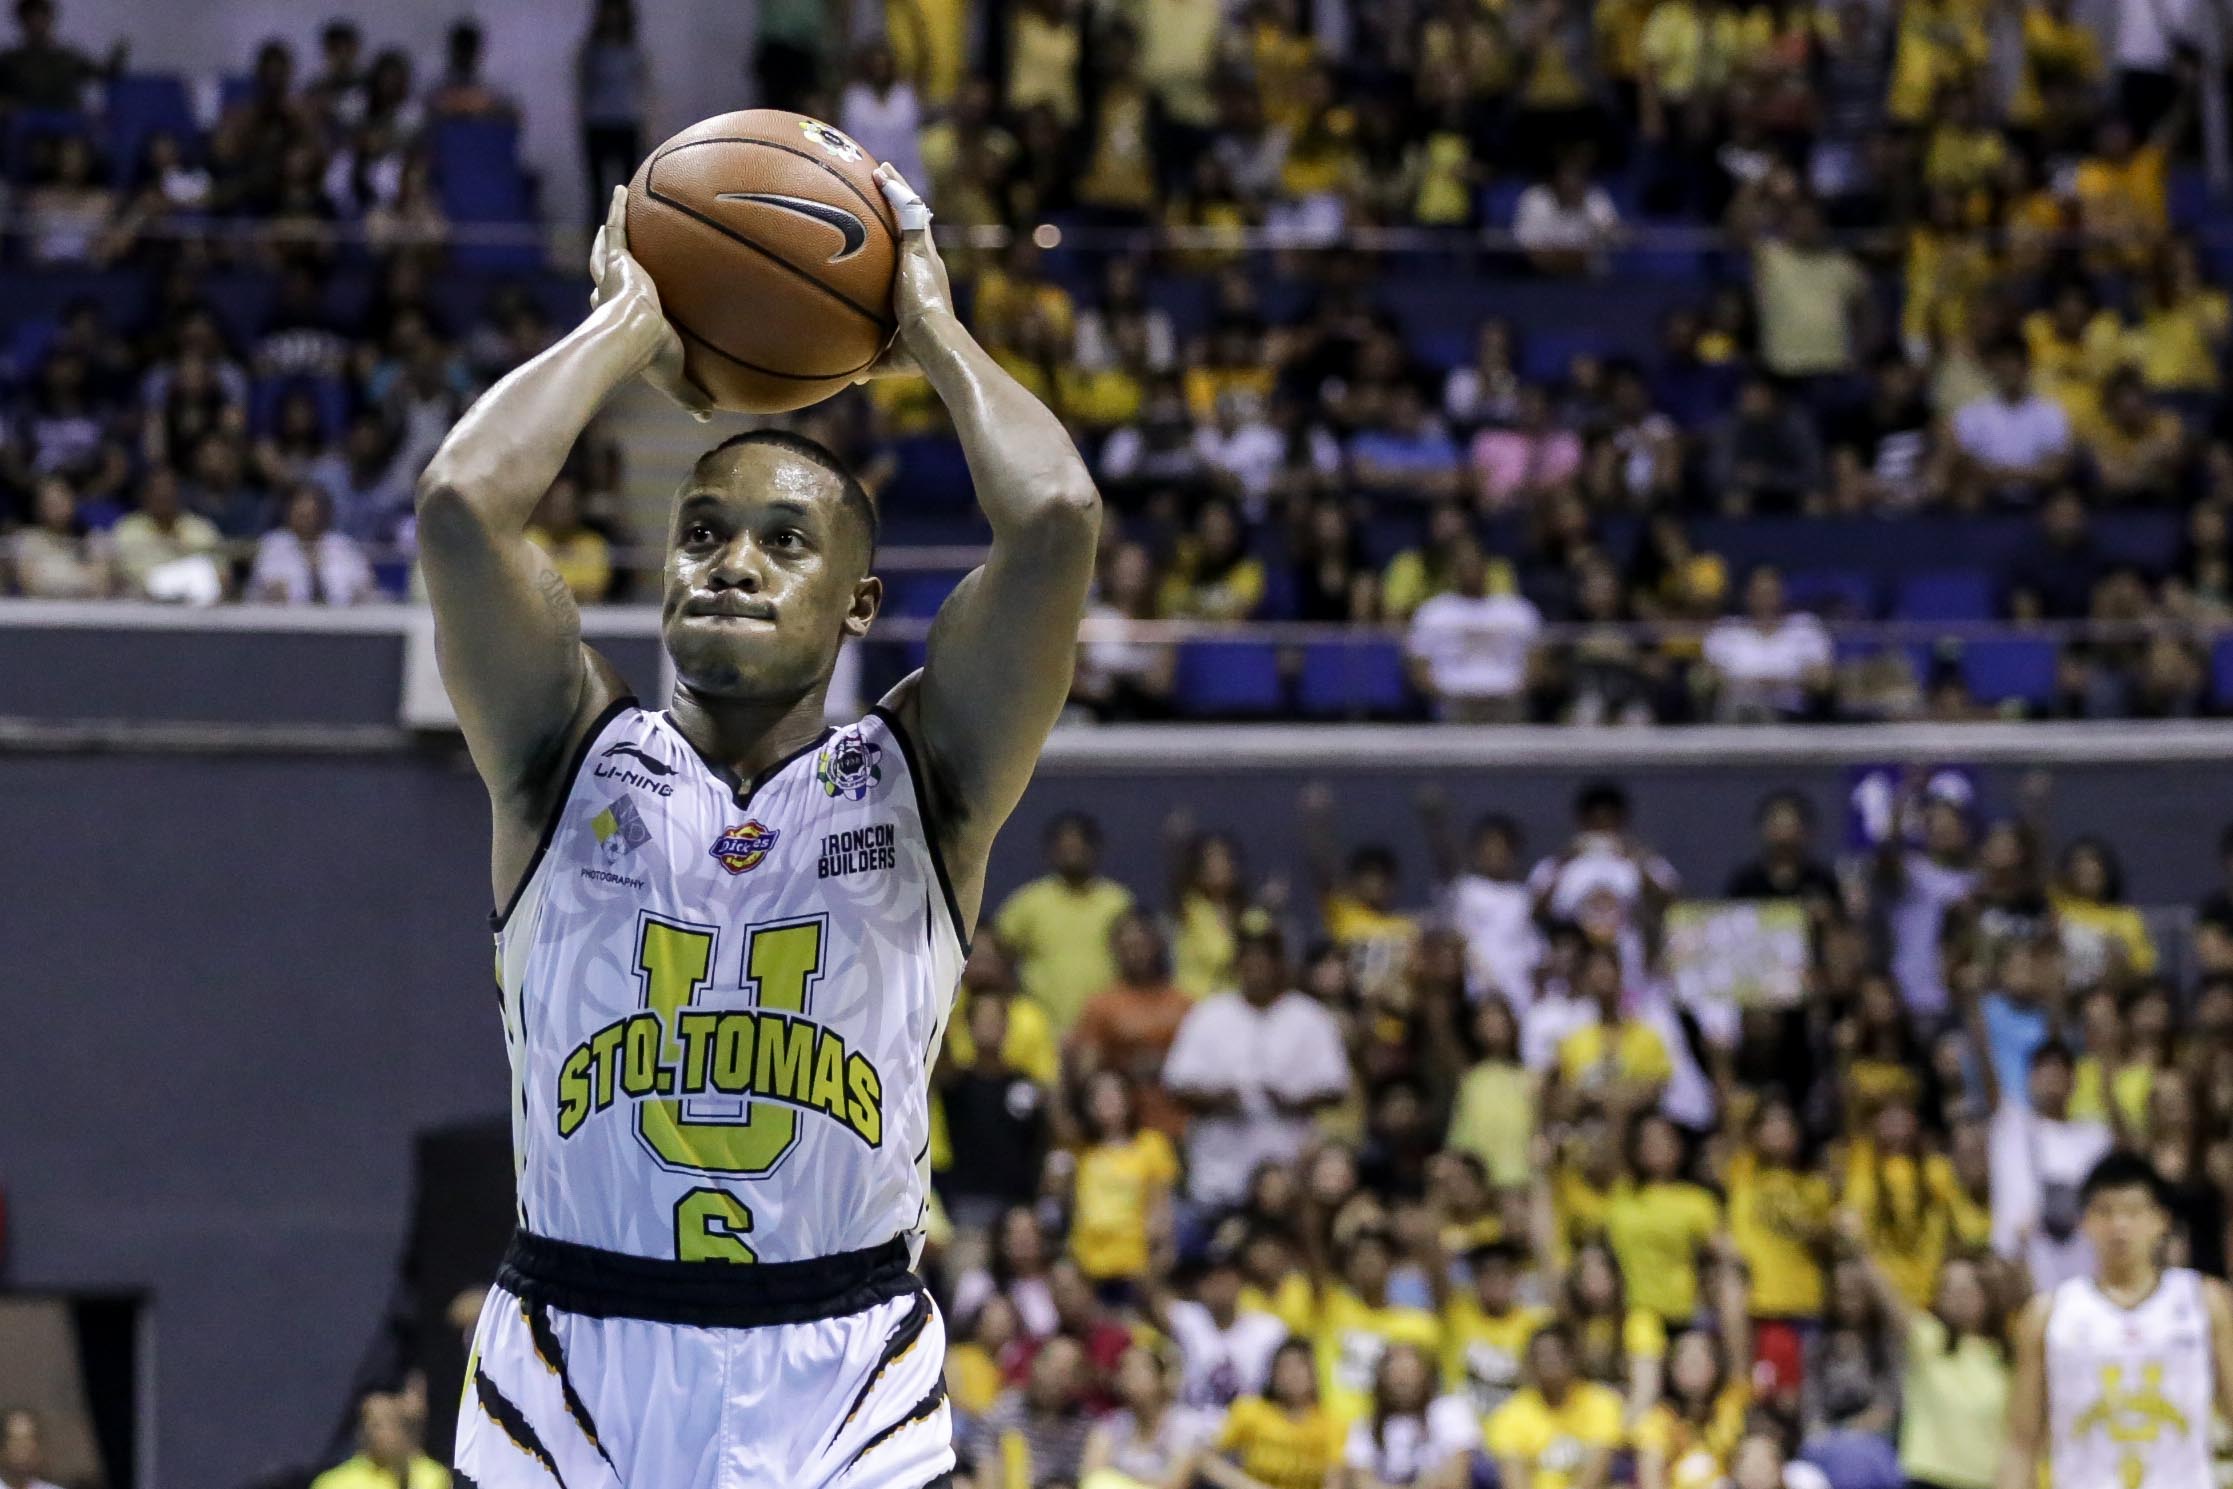 UST guard Jamil Sheriff. Photo by Tristan Tamayo/INQUIRER.net